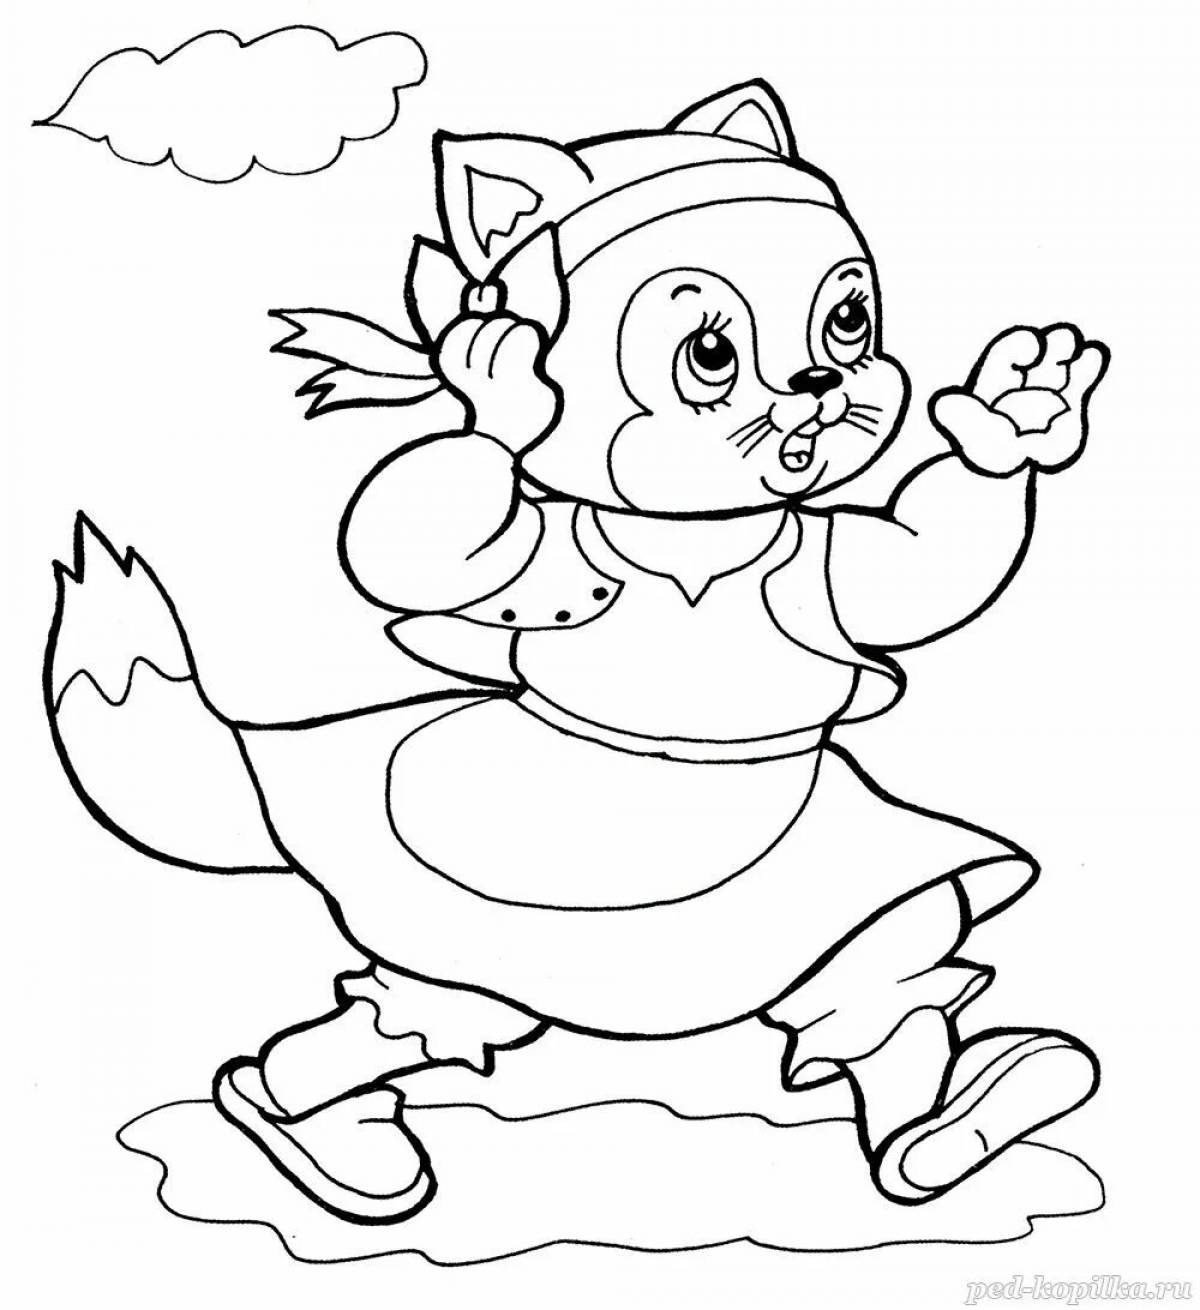 Sunny cat house coloring page for kids